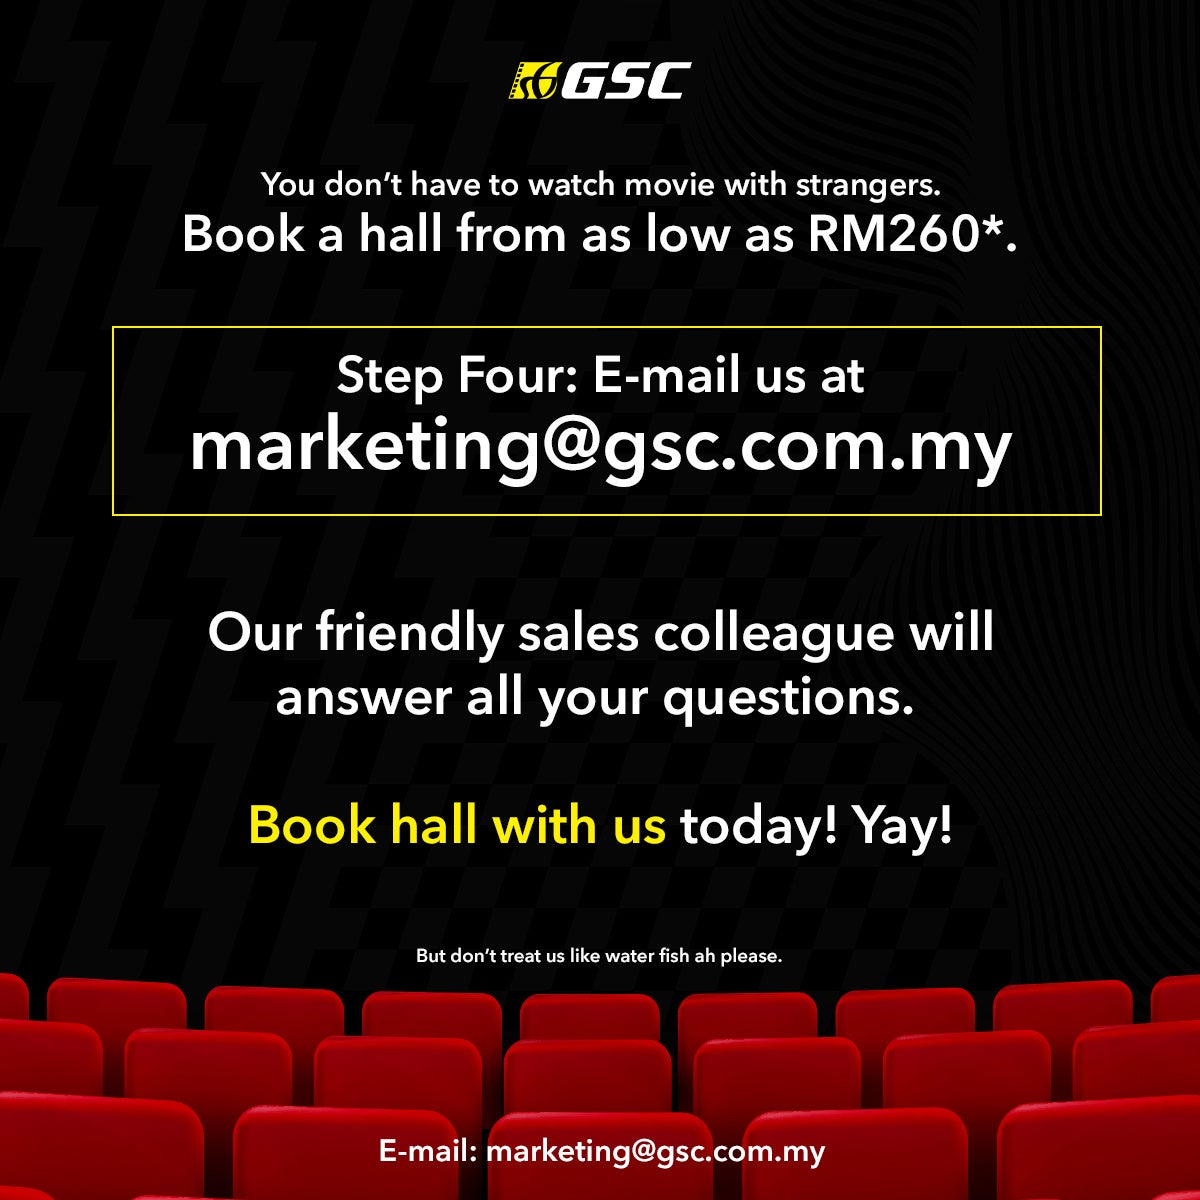 It S Stranger Free You Can Book An Entire Movie Hall At Gsc From As Low As Rm260 World Of Buzz